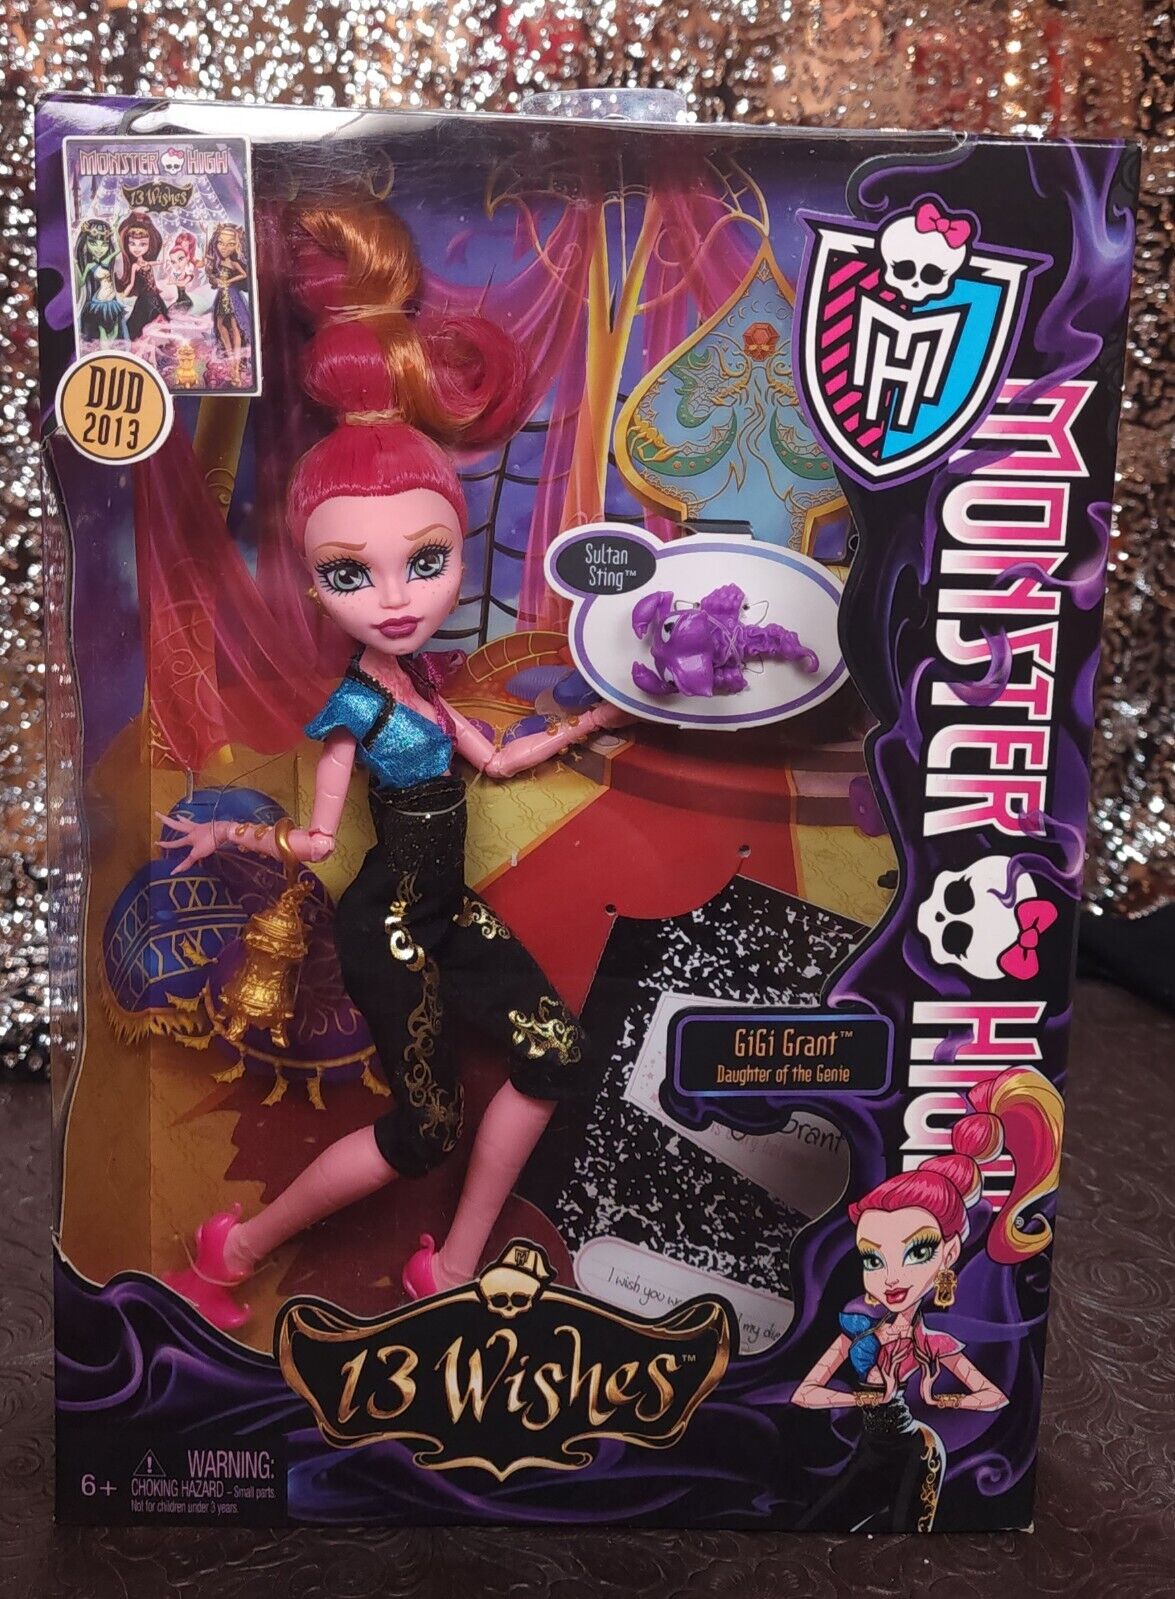 2012 Monster High Gigi Grant Daughter Of The Genie Doll 13 Wishes - NIB